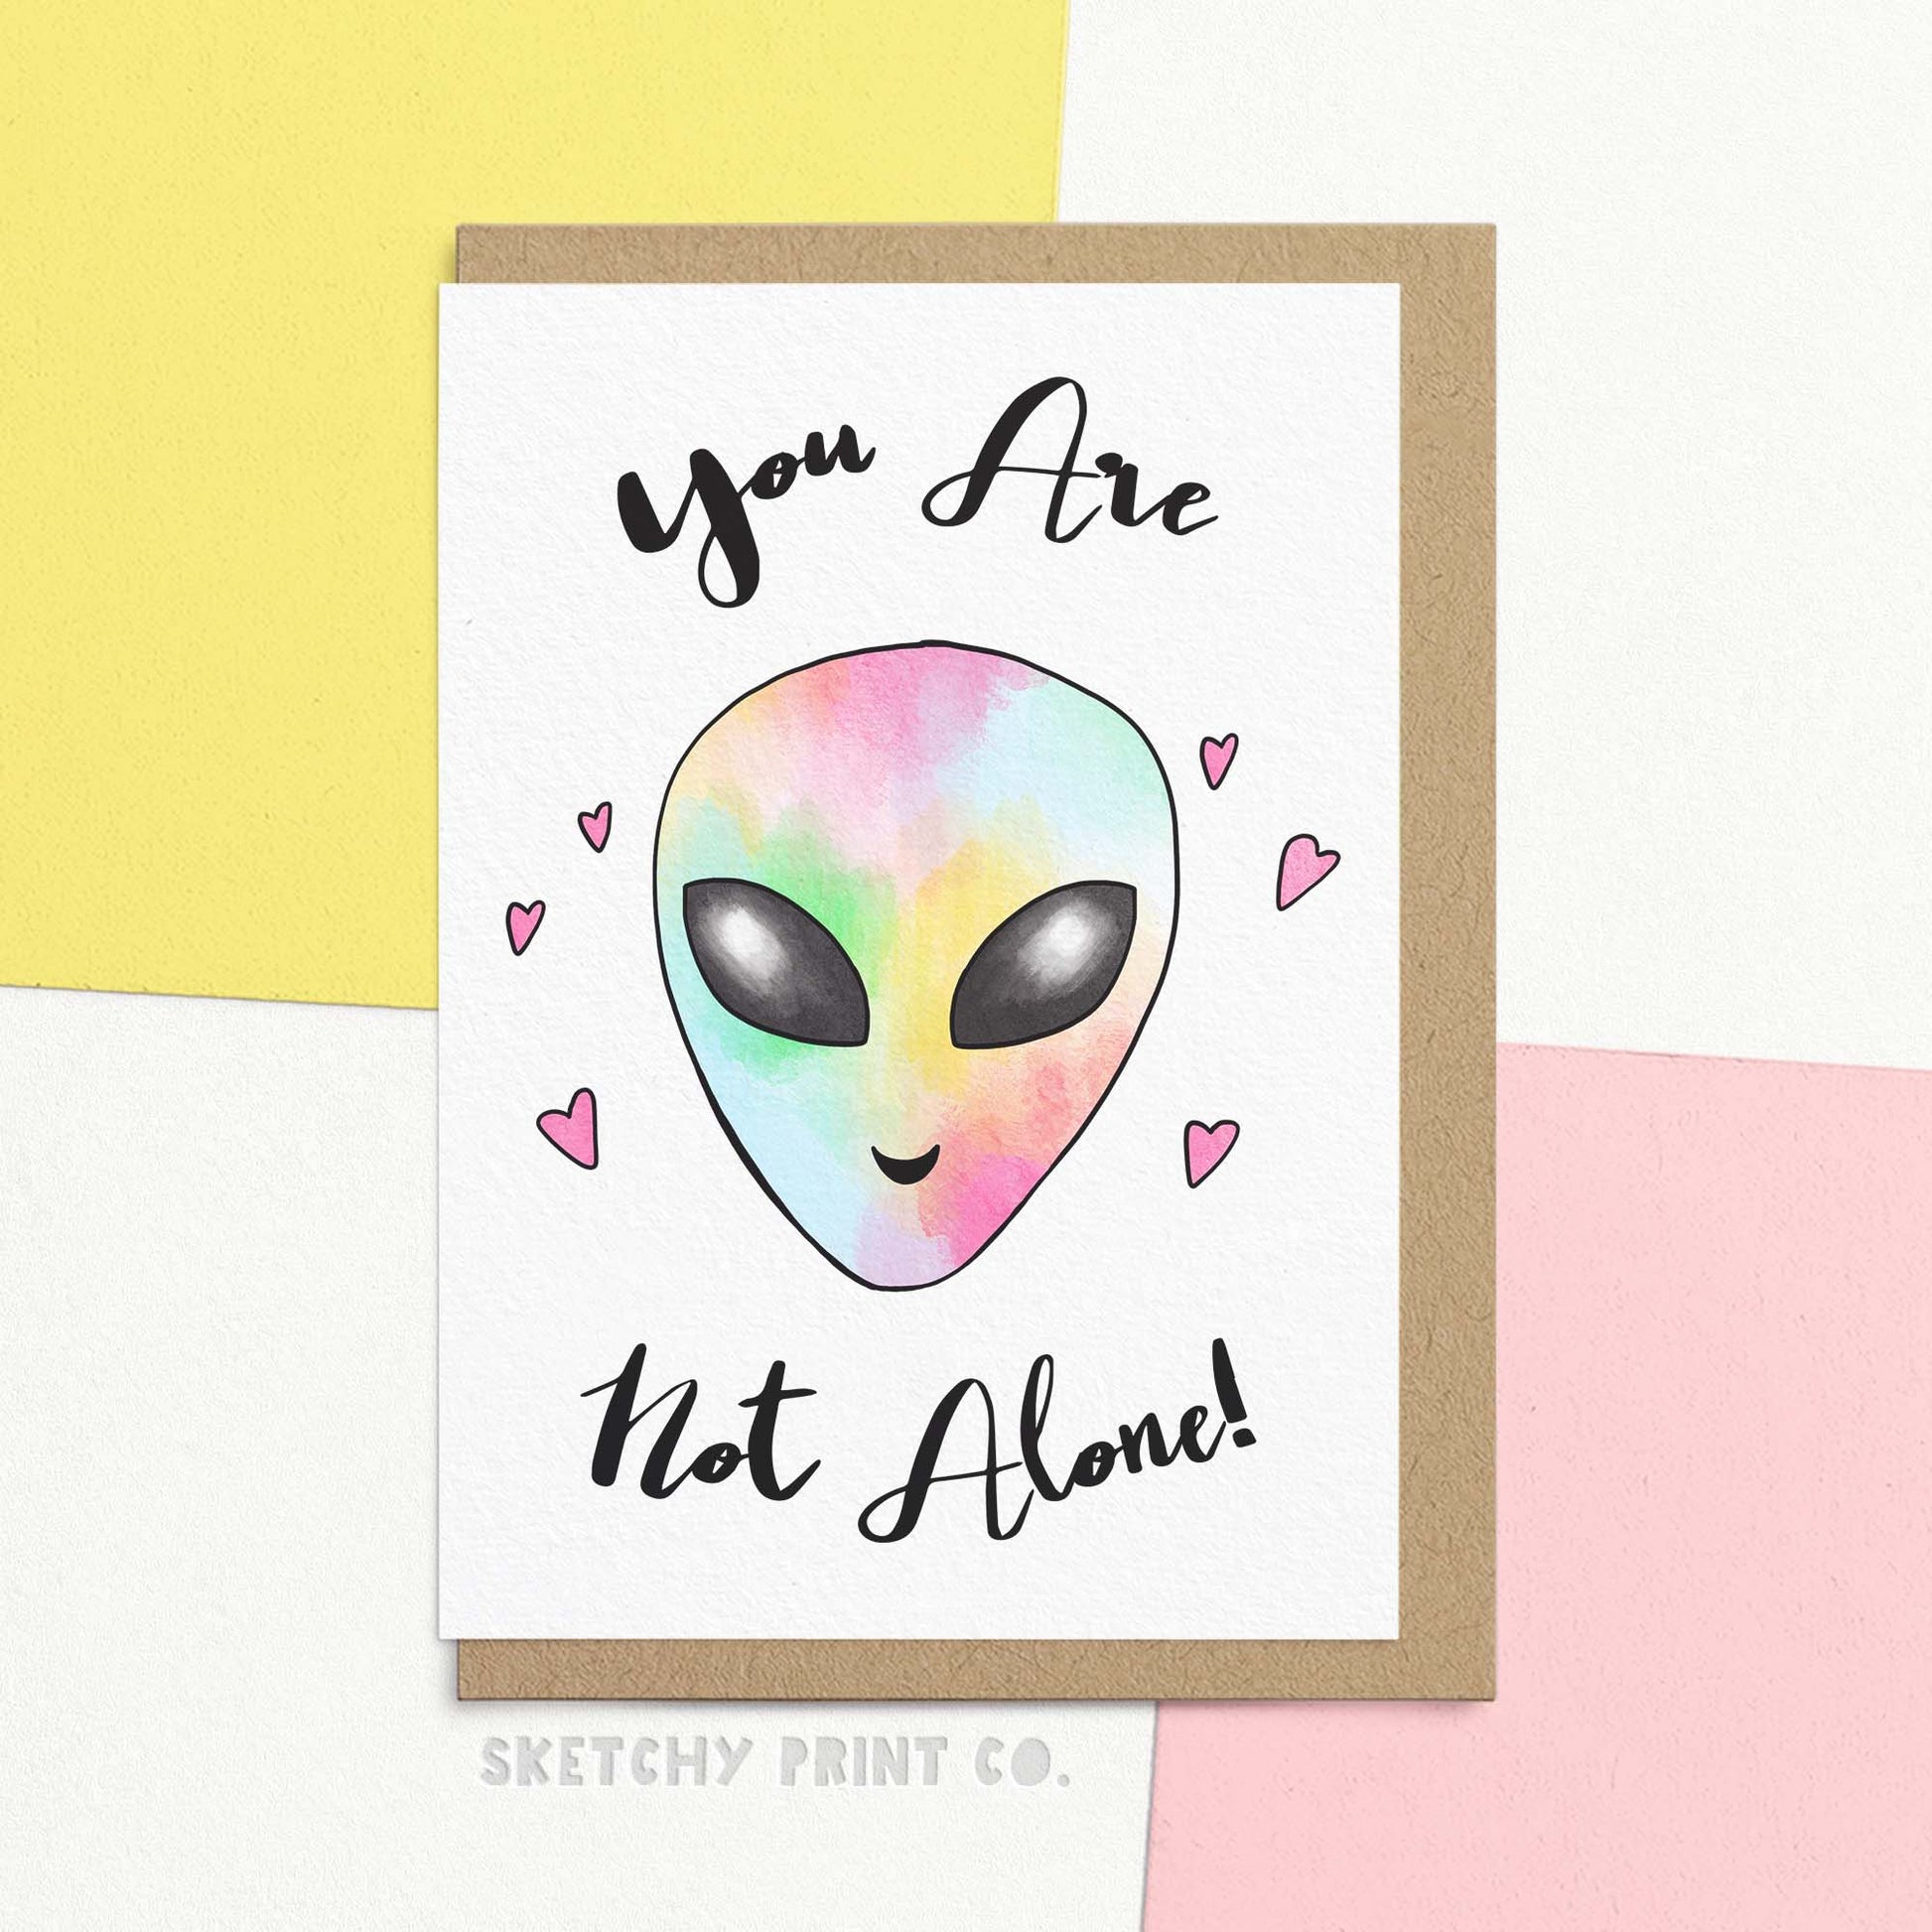 Cute just to say card for struggling friend reading you are not alone with a cute illustration of a pastel rainbow alien and hearts. Let your friend know they're not alone with our cute card. If they are feeling a little alien, let them know that you can be cute rainbow aliens together! Share the love and support they need in a fun and uplifting way, our adorable card comes blank inside for your own personalised message.